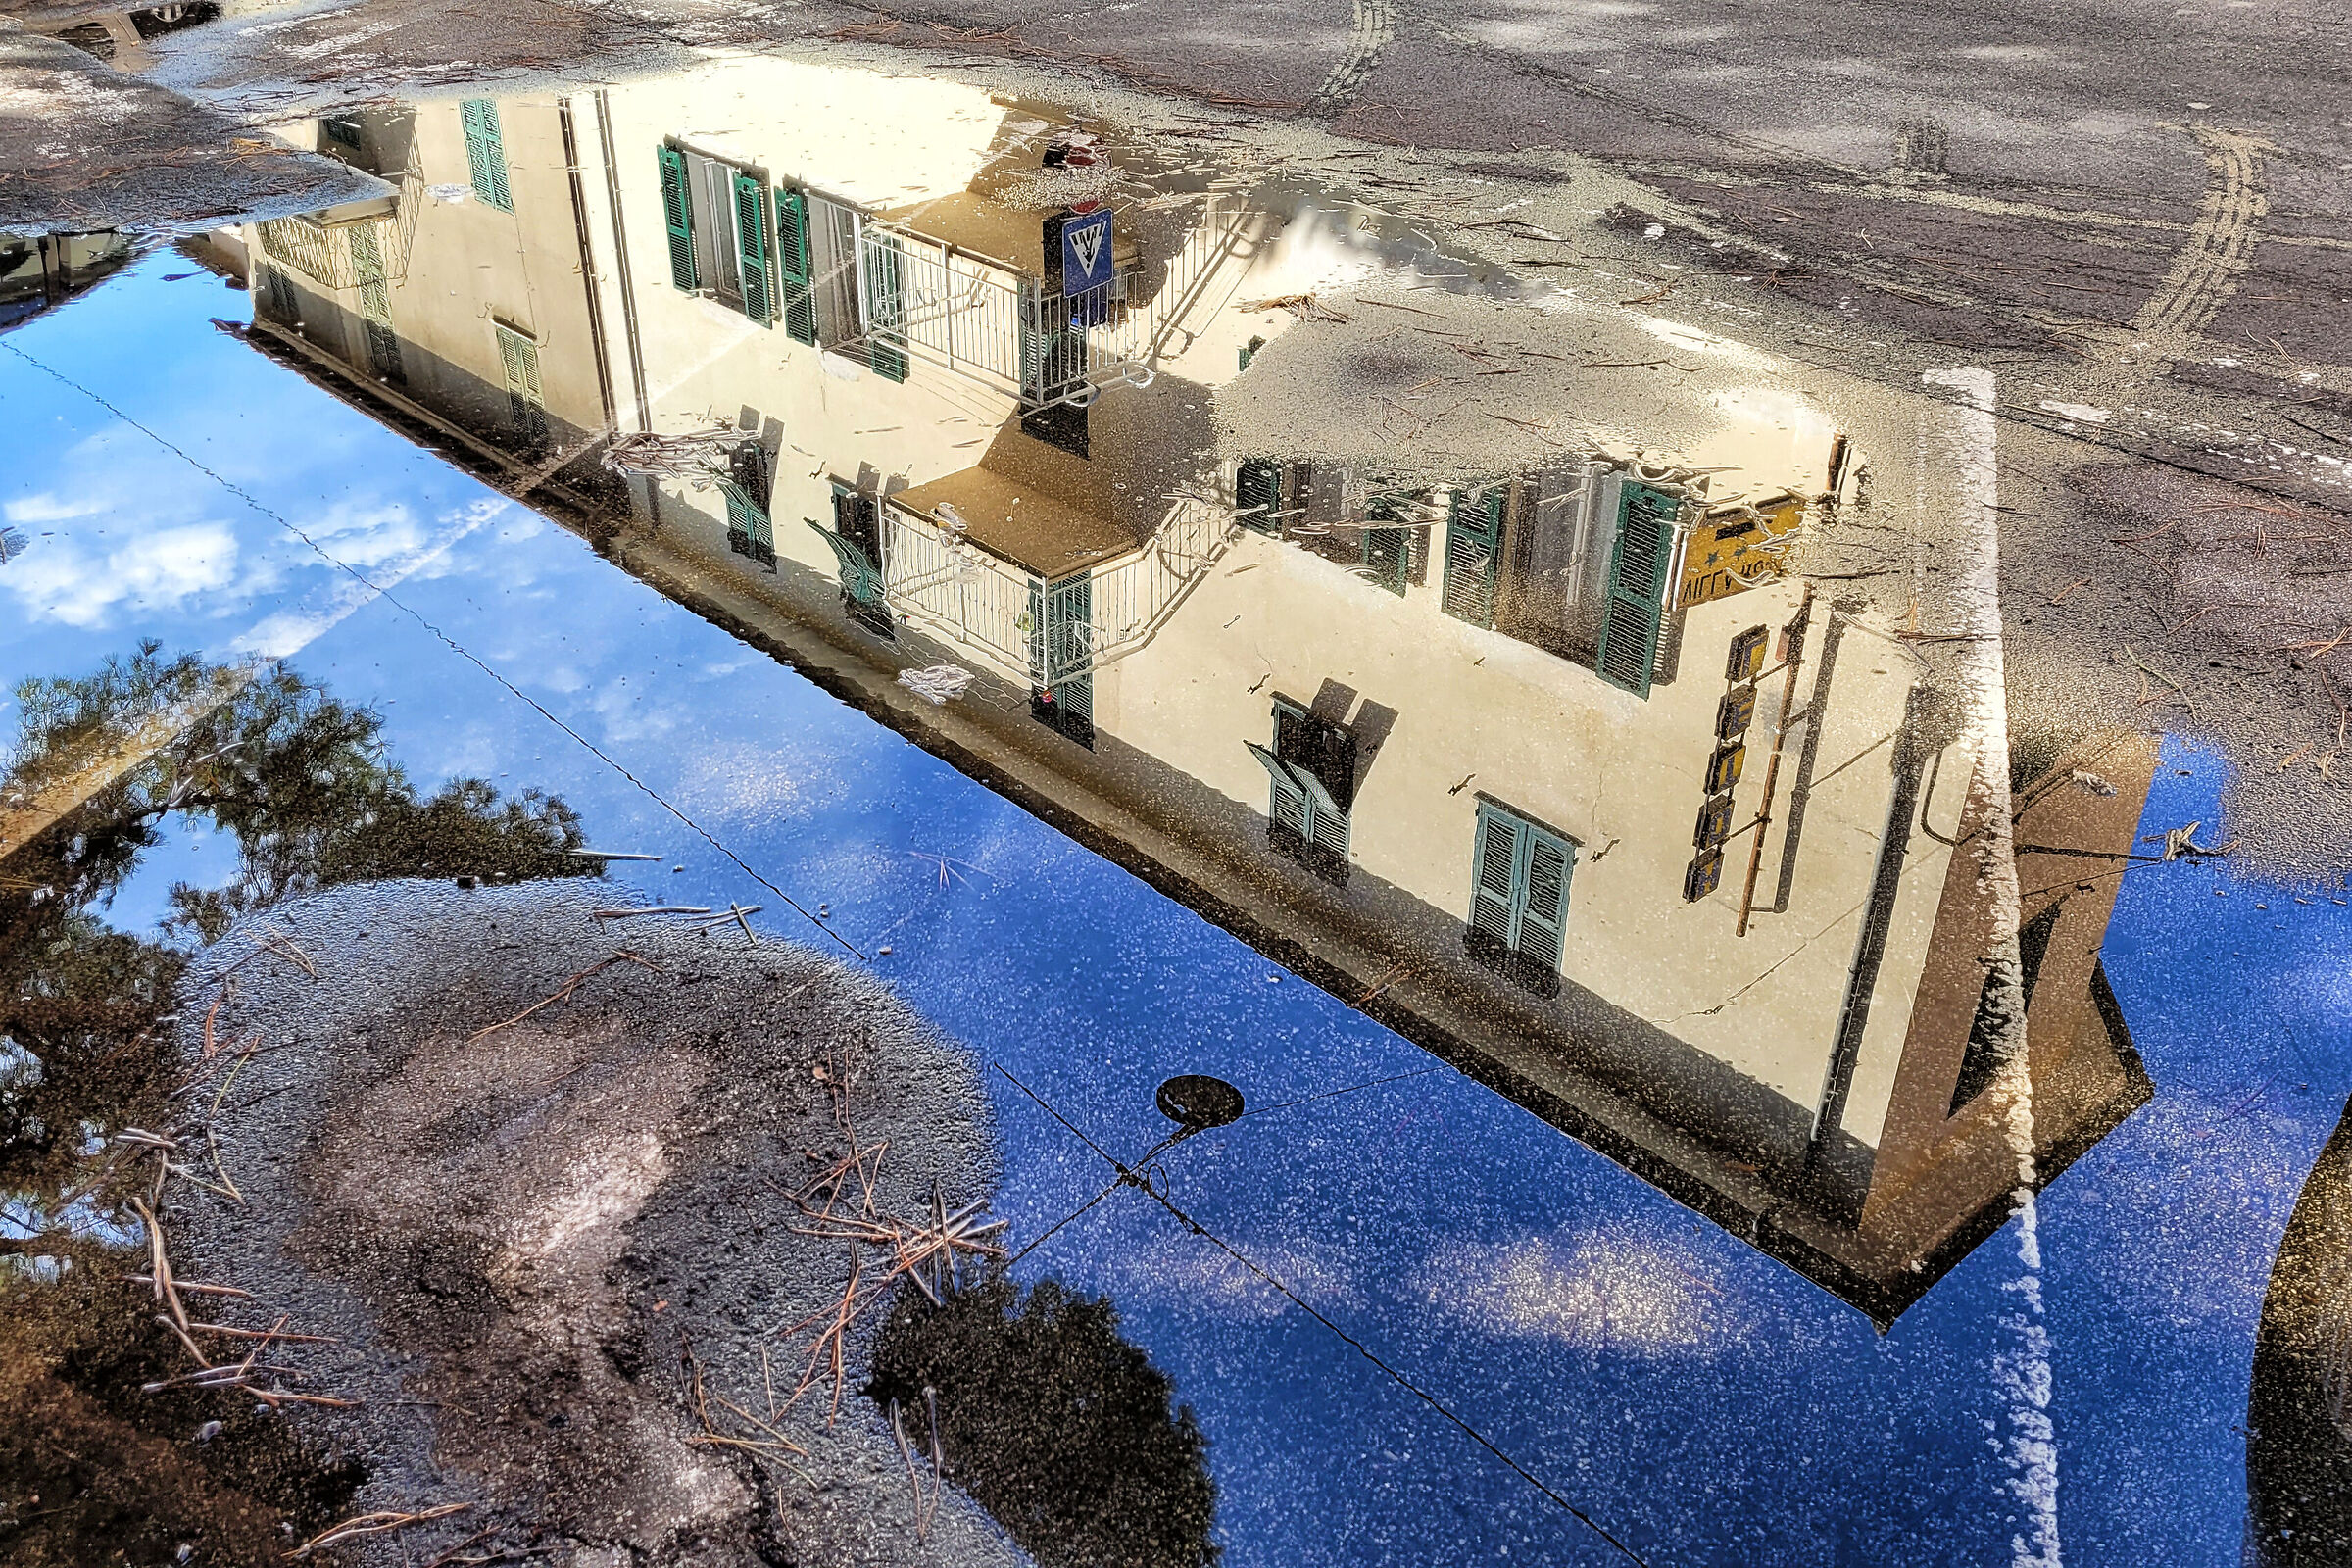 The city in a puddle...